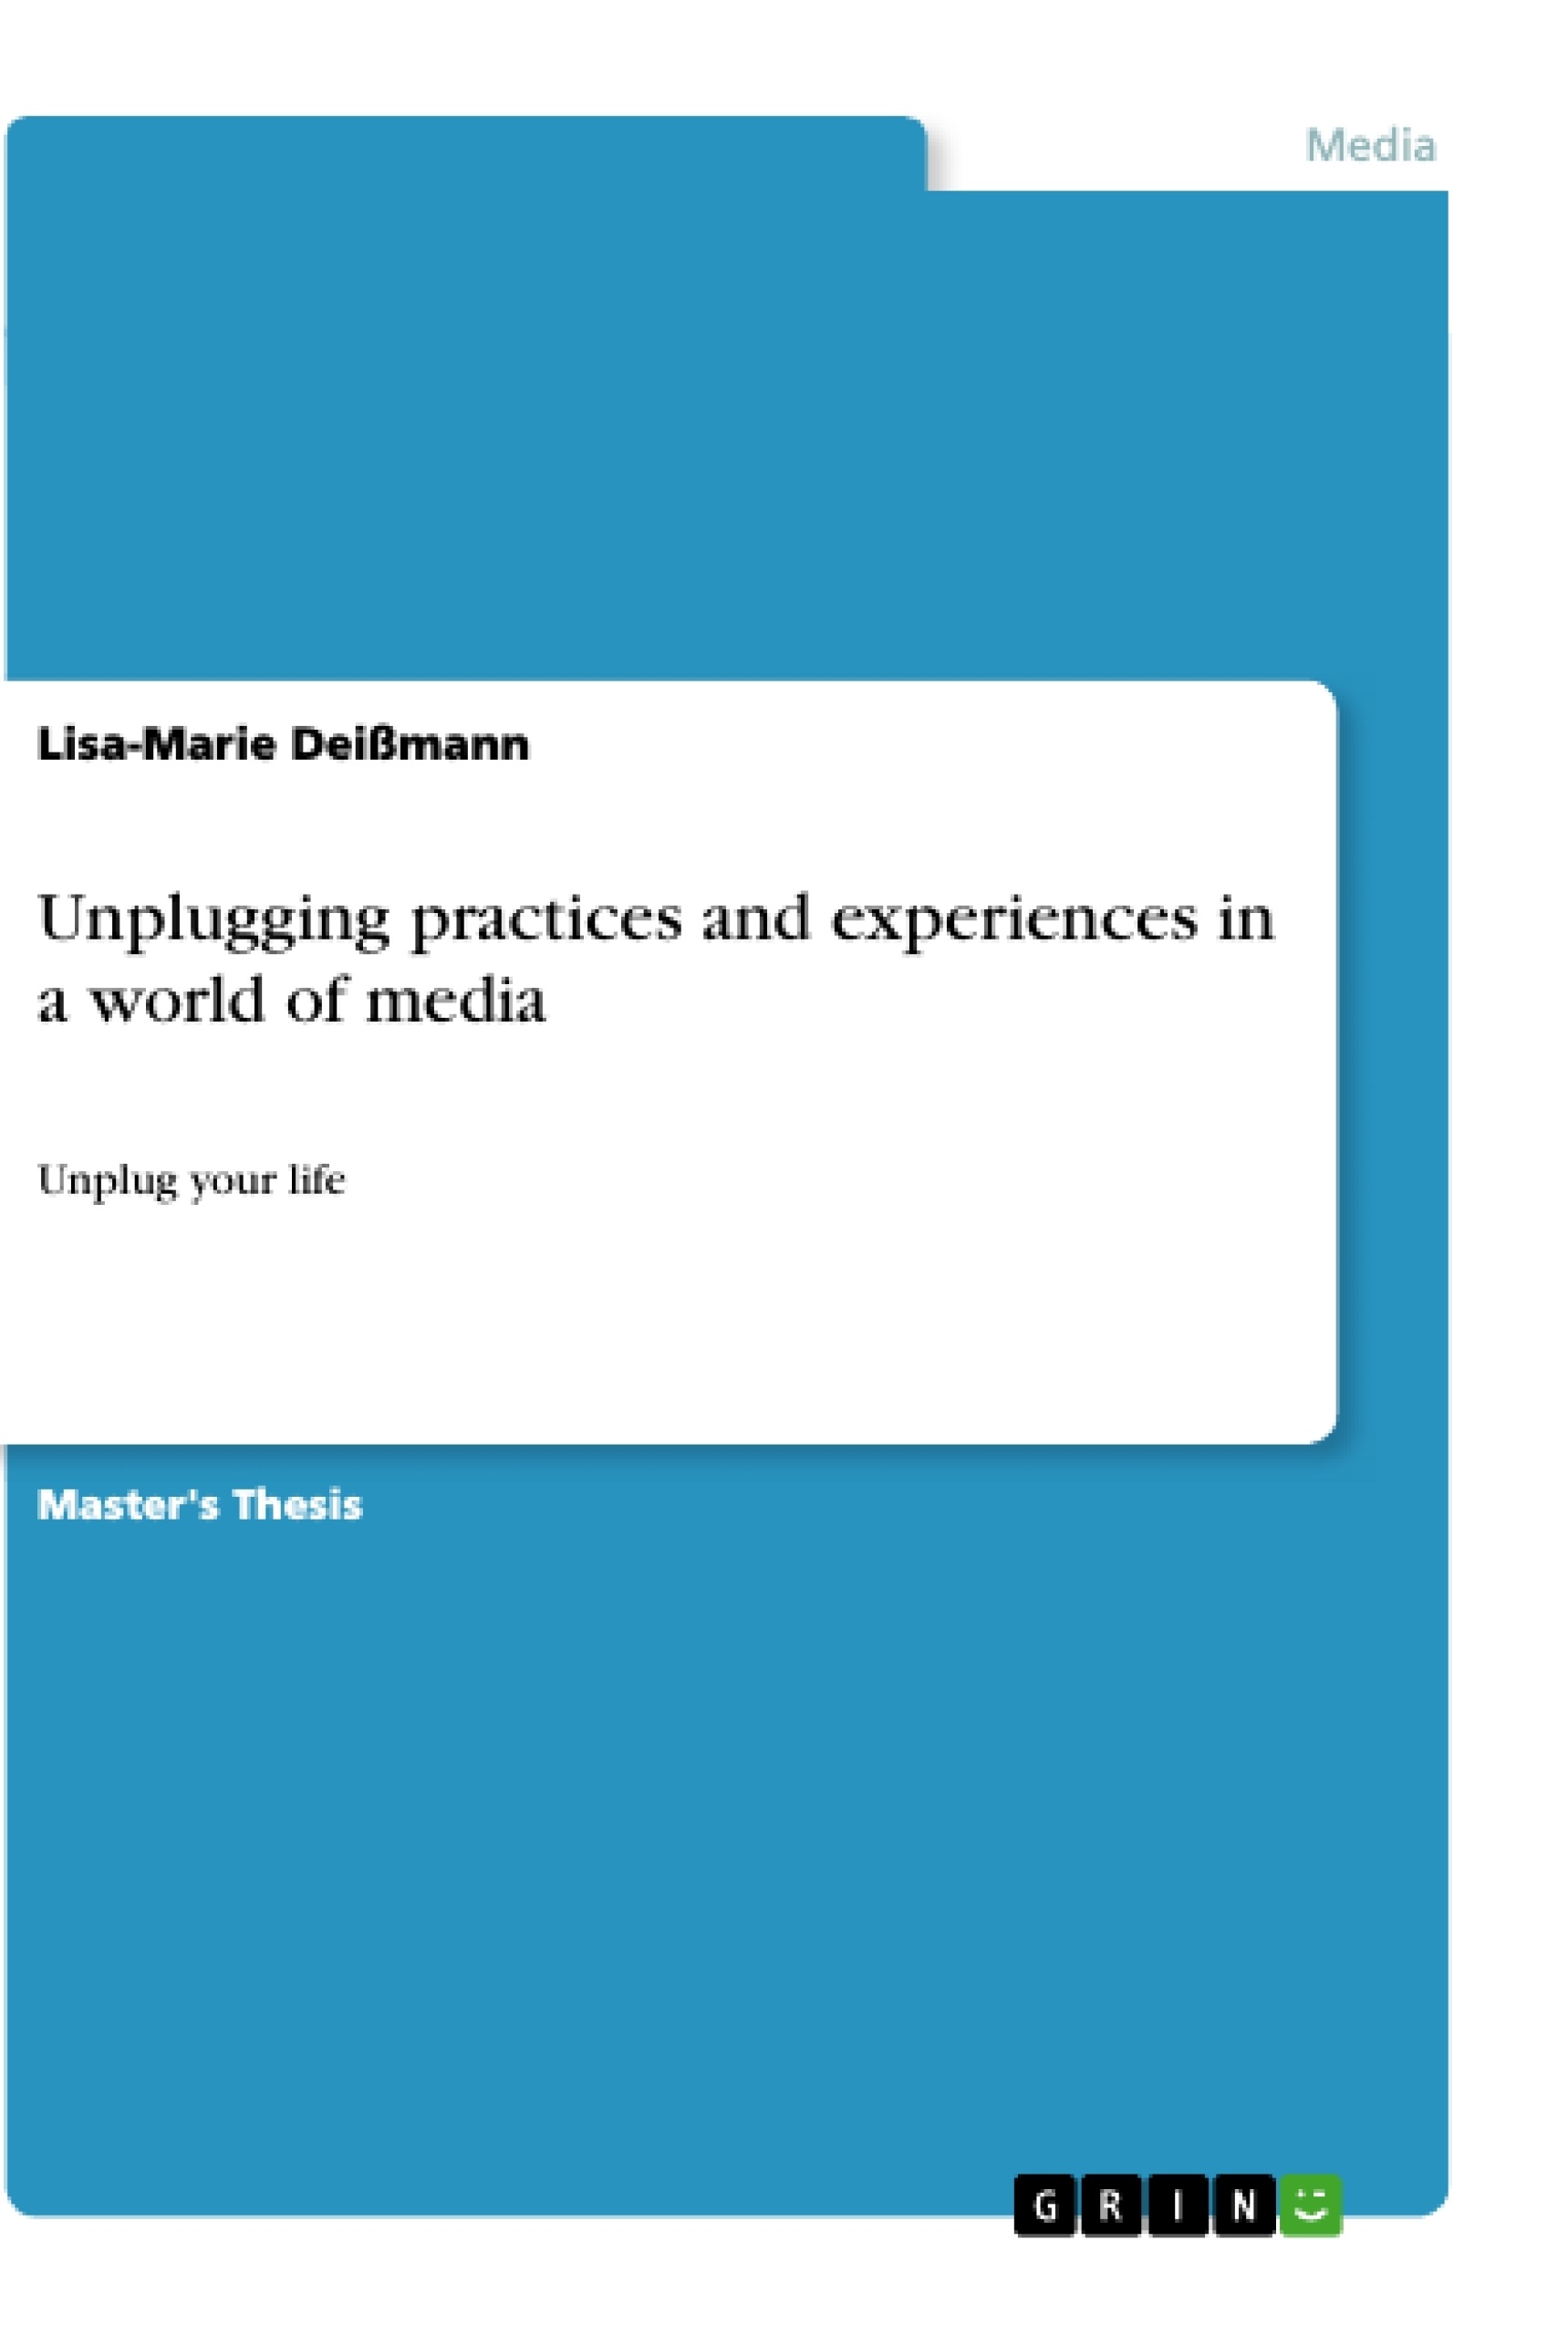 Title: Unplugging practices and experiences in a world of media